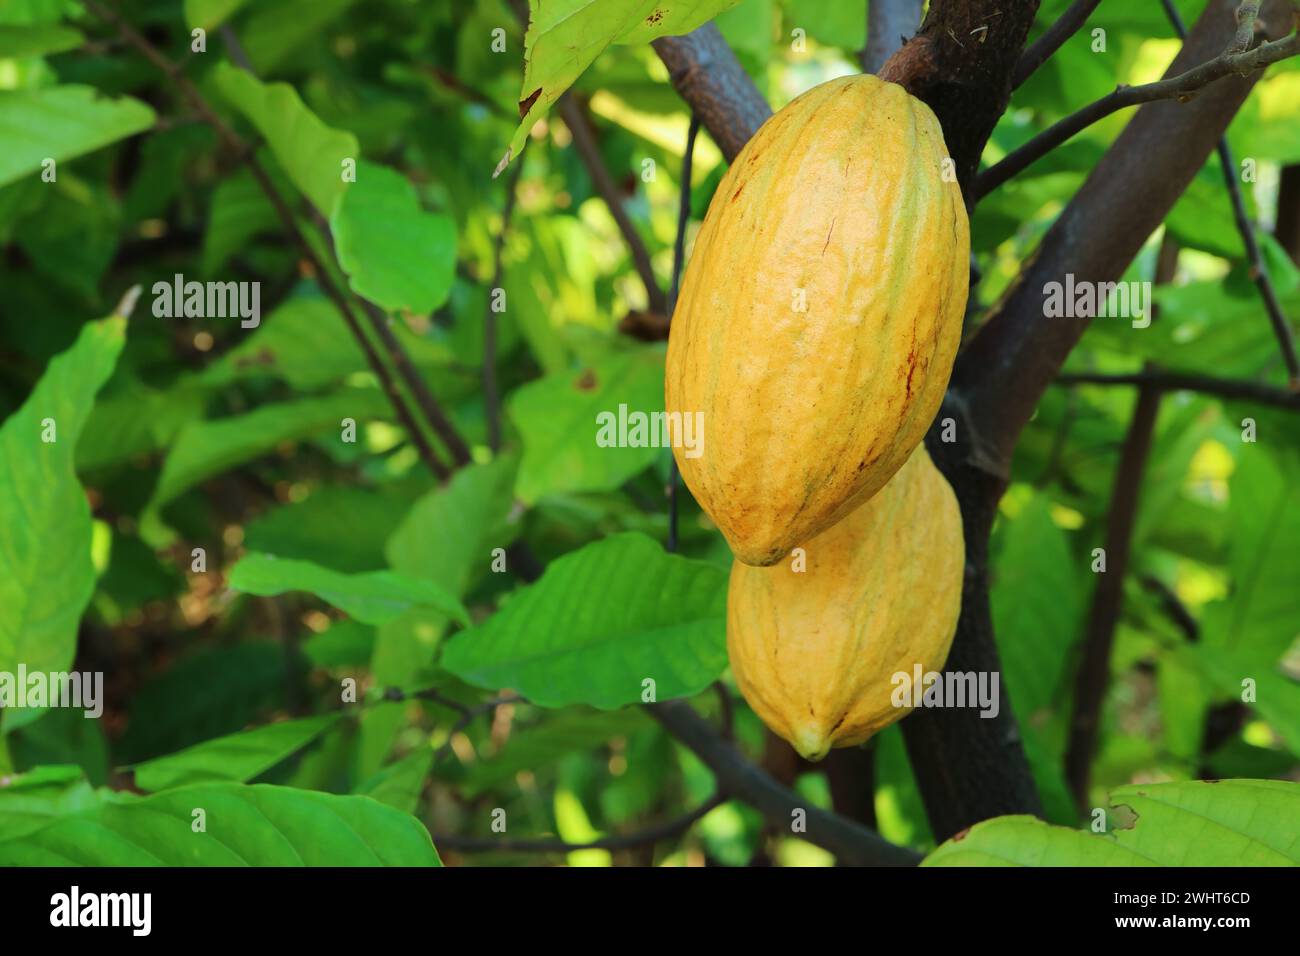 Closeup of a Pair of Cacao Fruits Called Cacao Pods Ripening on Their Tree Stock Photo